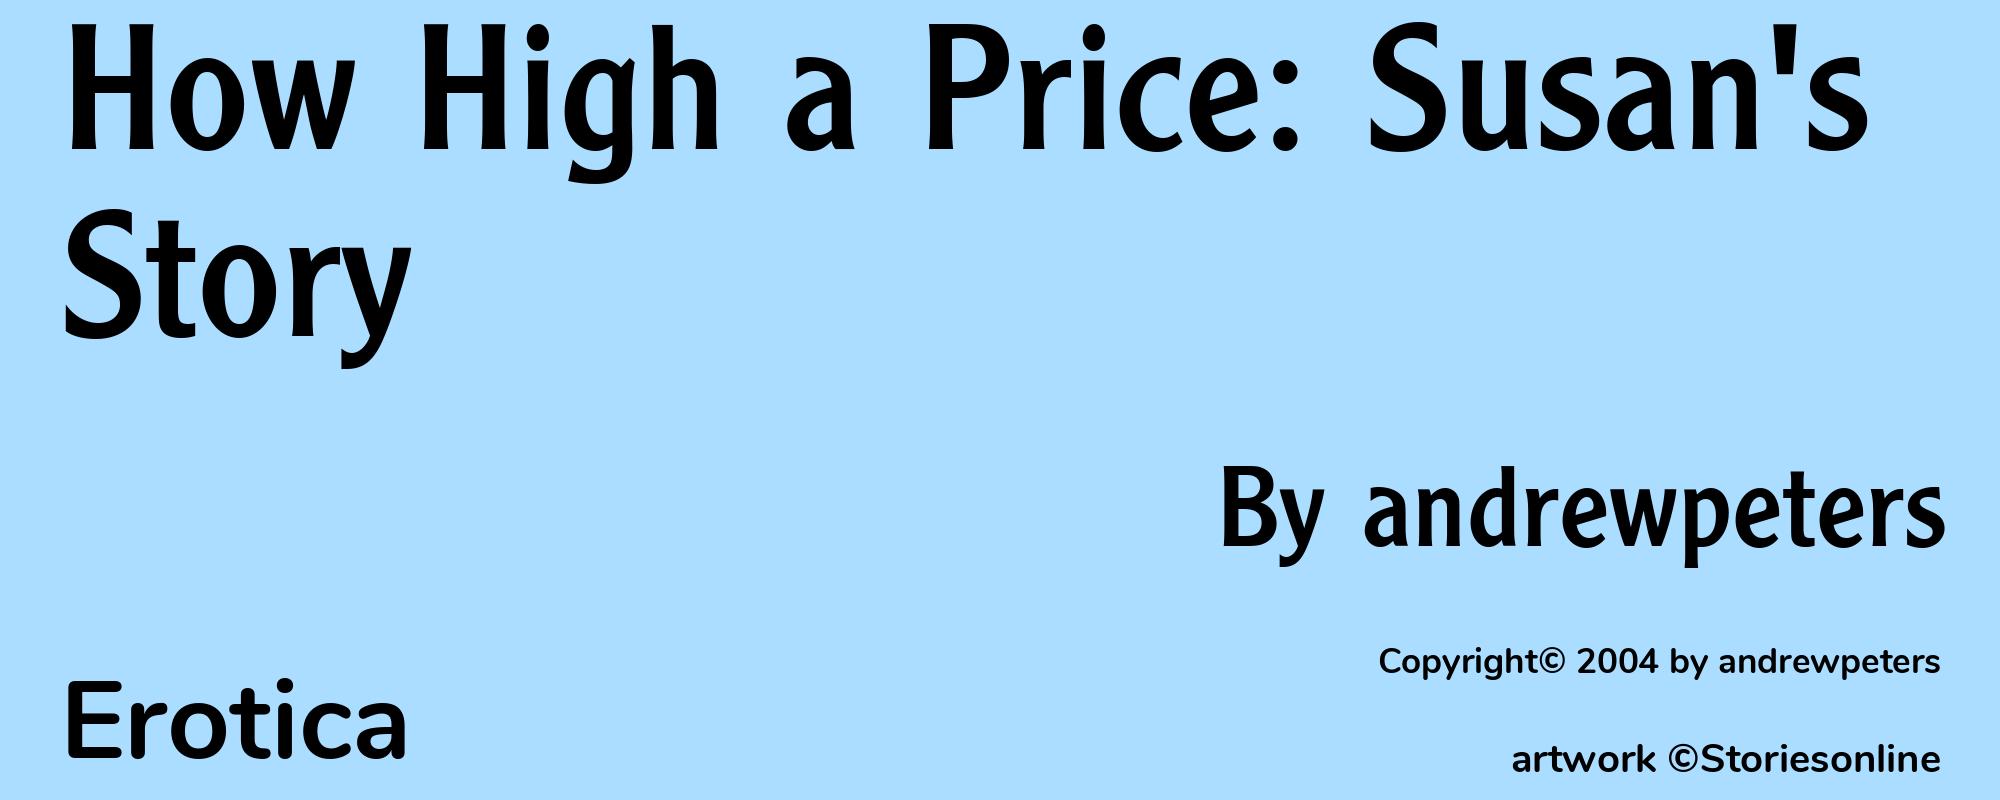 How High a Price: Susan's Story - Cover